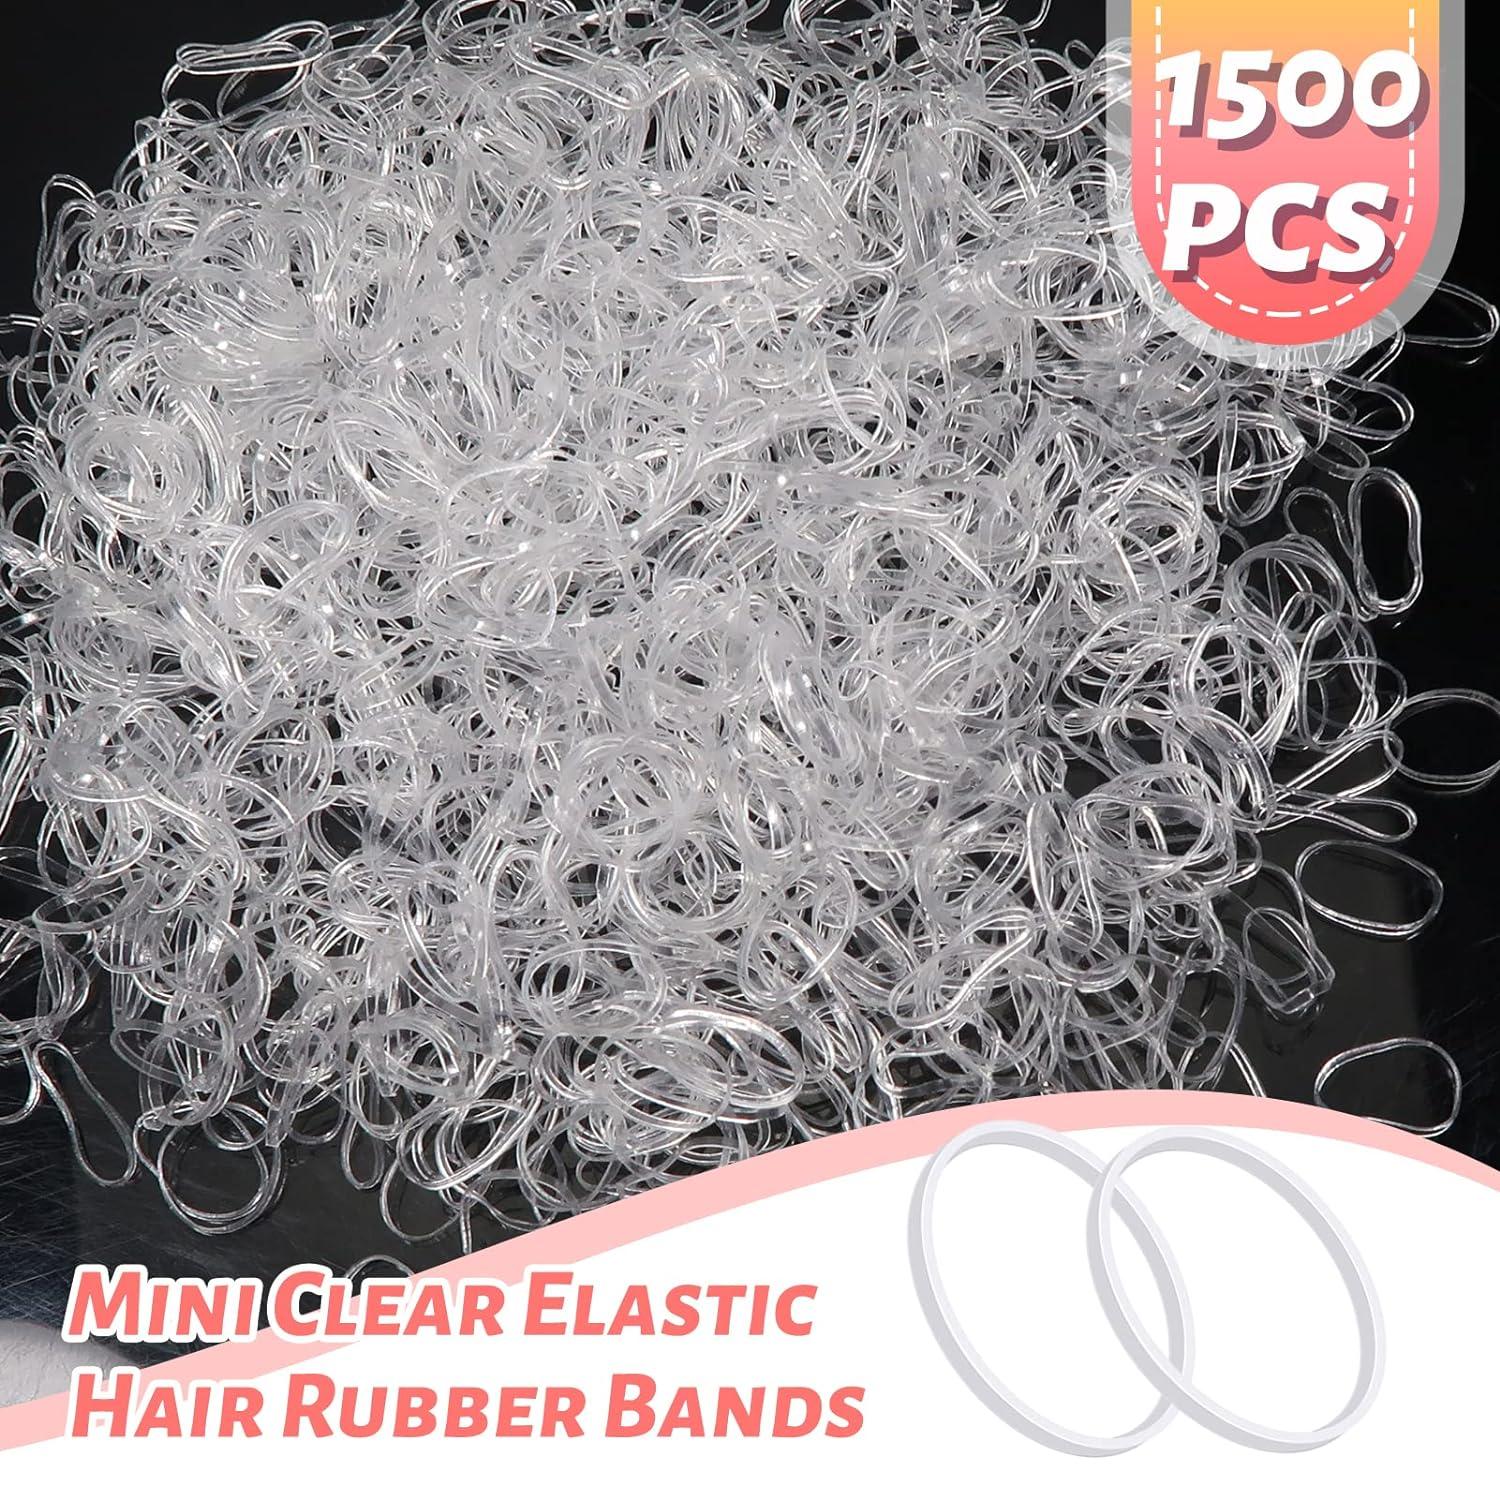 Clear Hair Elastics Ties Small Rubber Bands for Hair Mini Elastic Hair  Bands Mini Clear Hair Ties for Women Girls Hair Accessories 1500Pcs